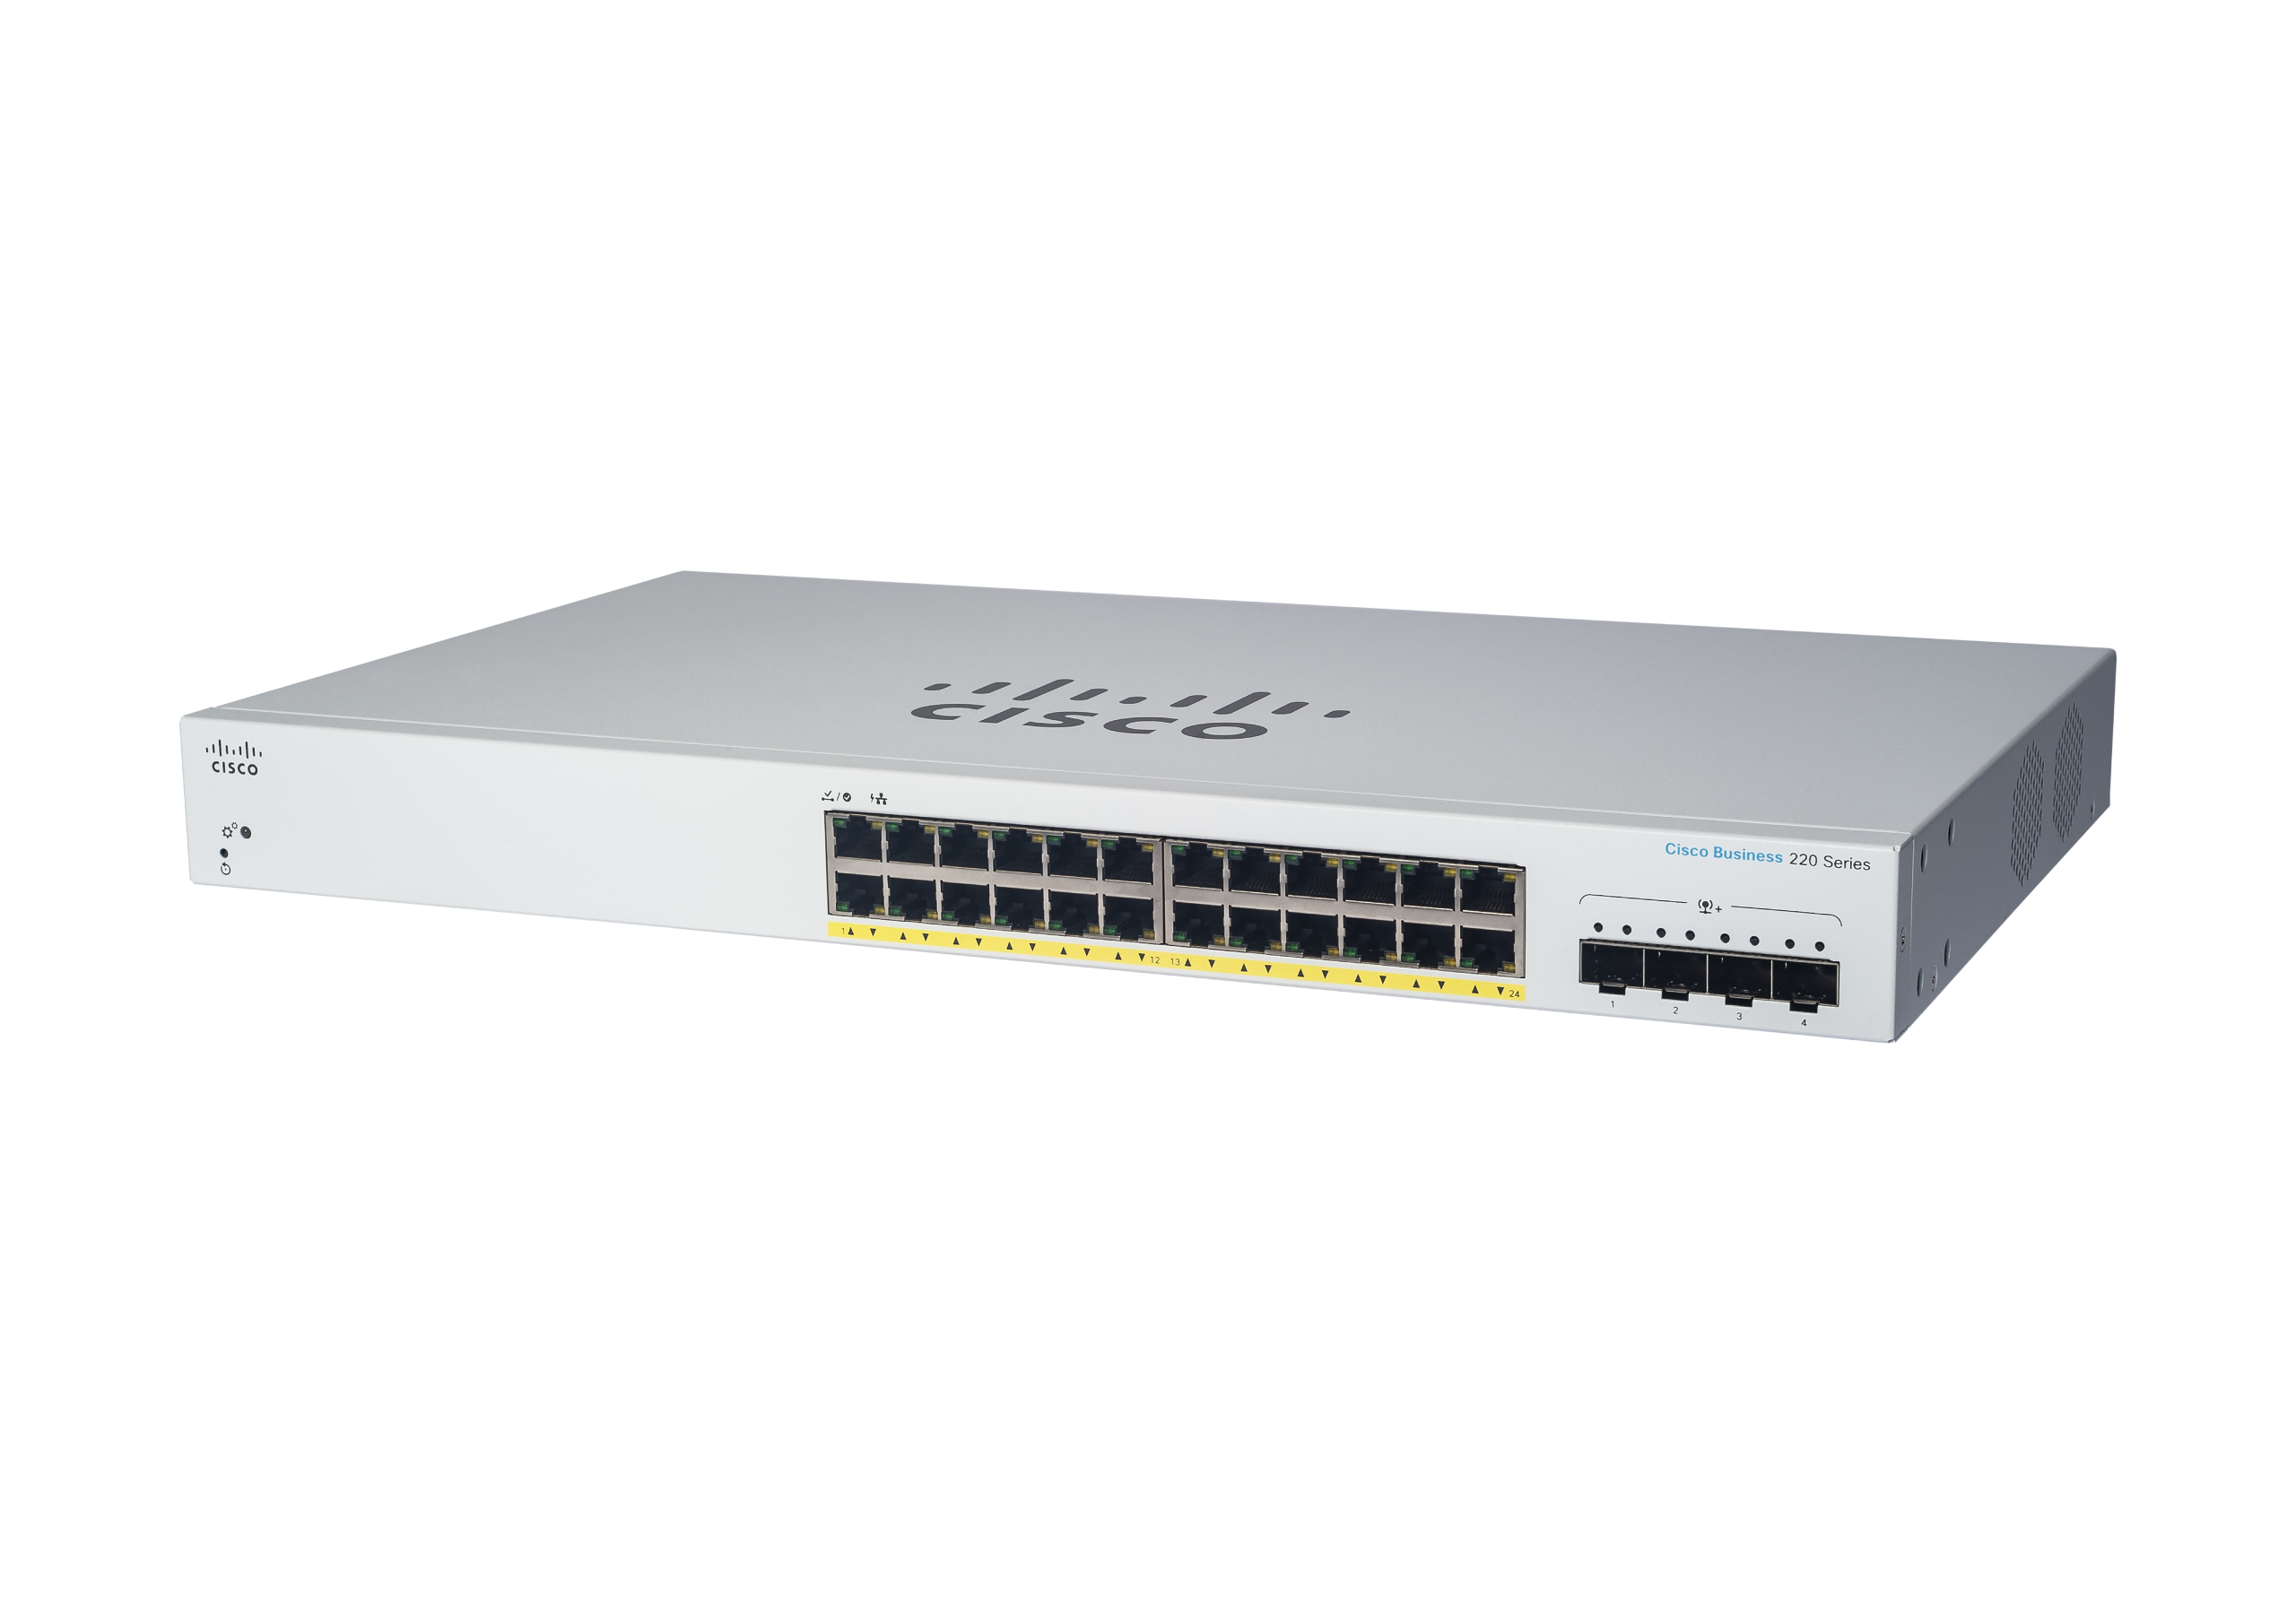 Cisco Business CBS220-24FP-4G 24 Port Layer 2 Managed Ethernet Switch